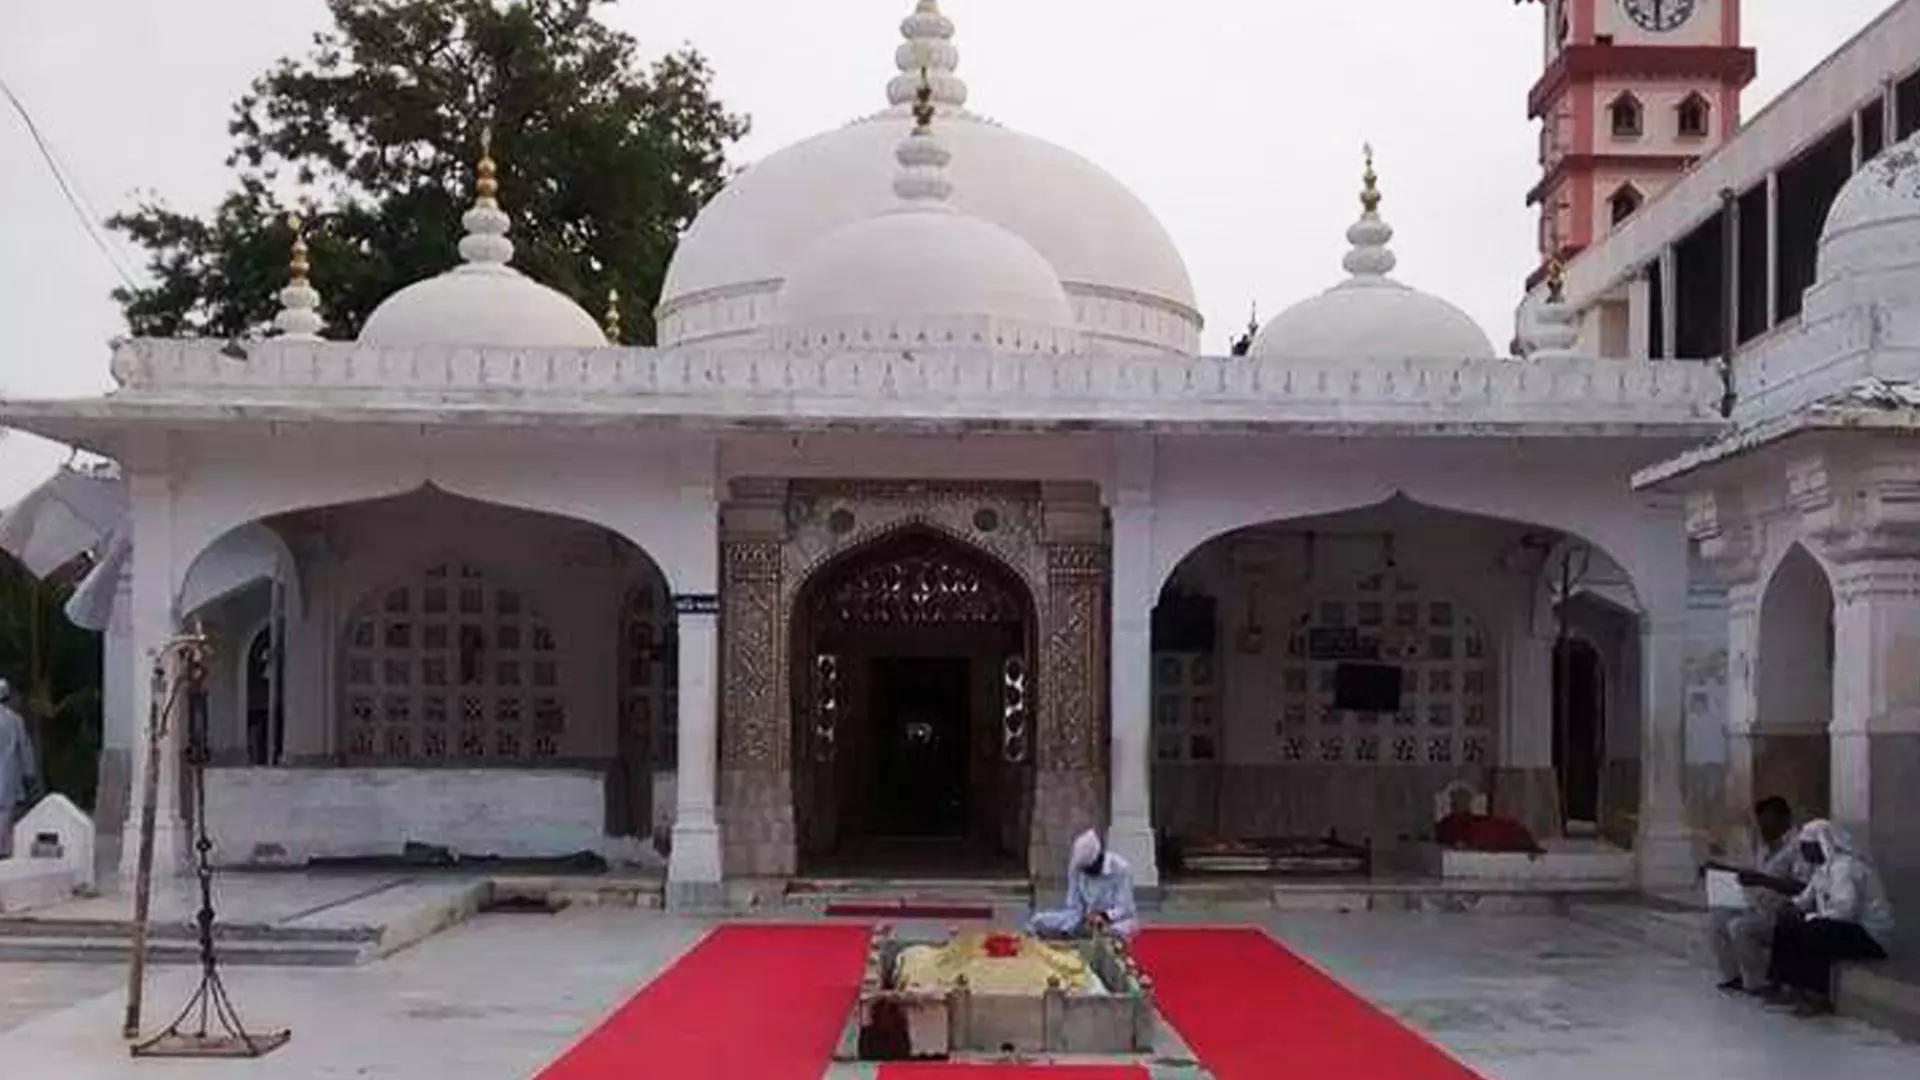 The Sufi shrine, or dargah, of Saint Imamshah Bawa dates back to 600 years and has been always revered the residents of Pirana and nearby areas cutting across religious divides.